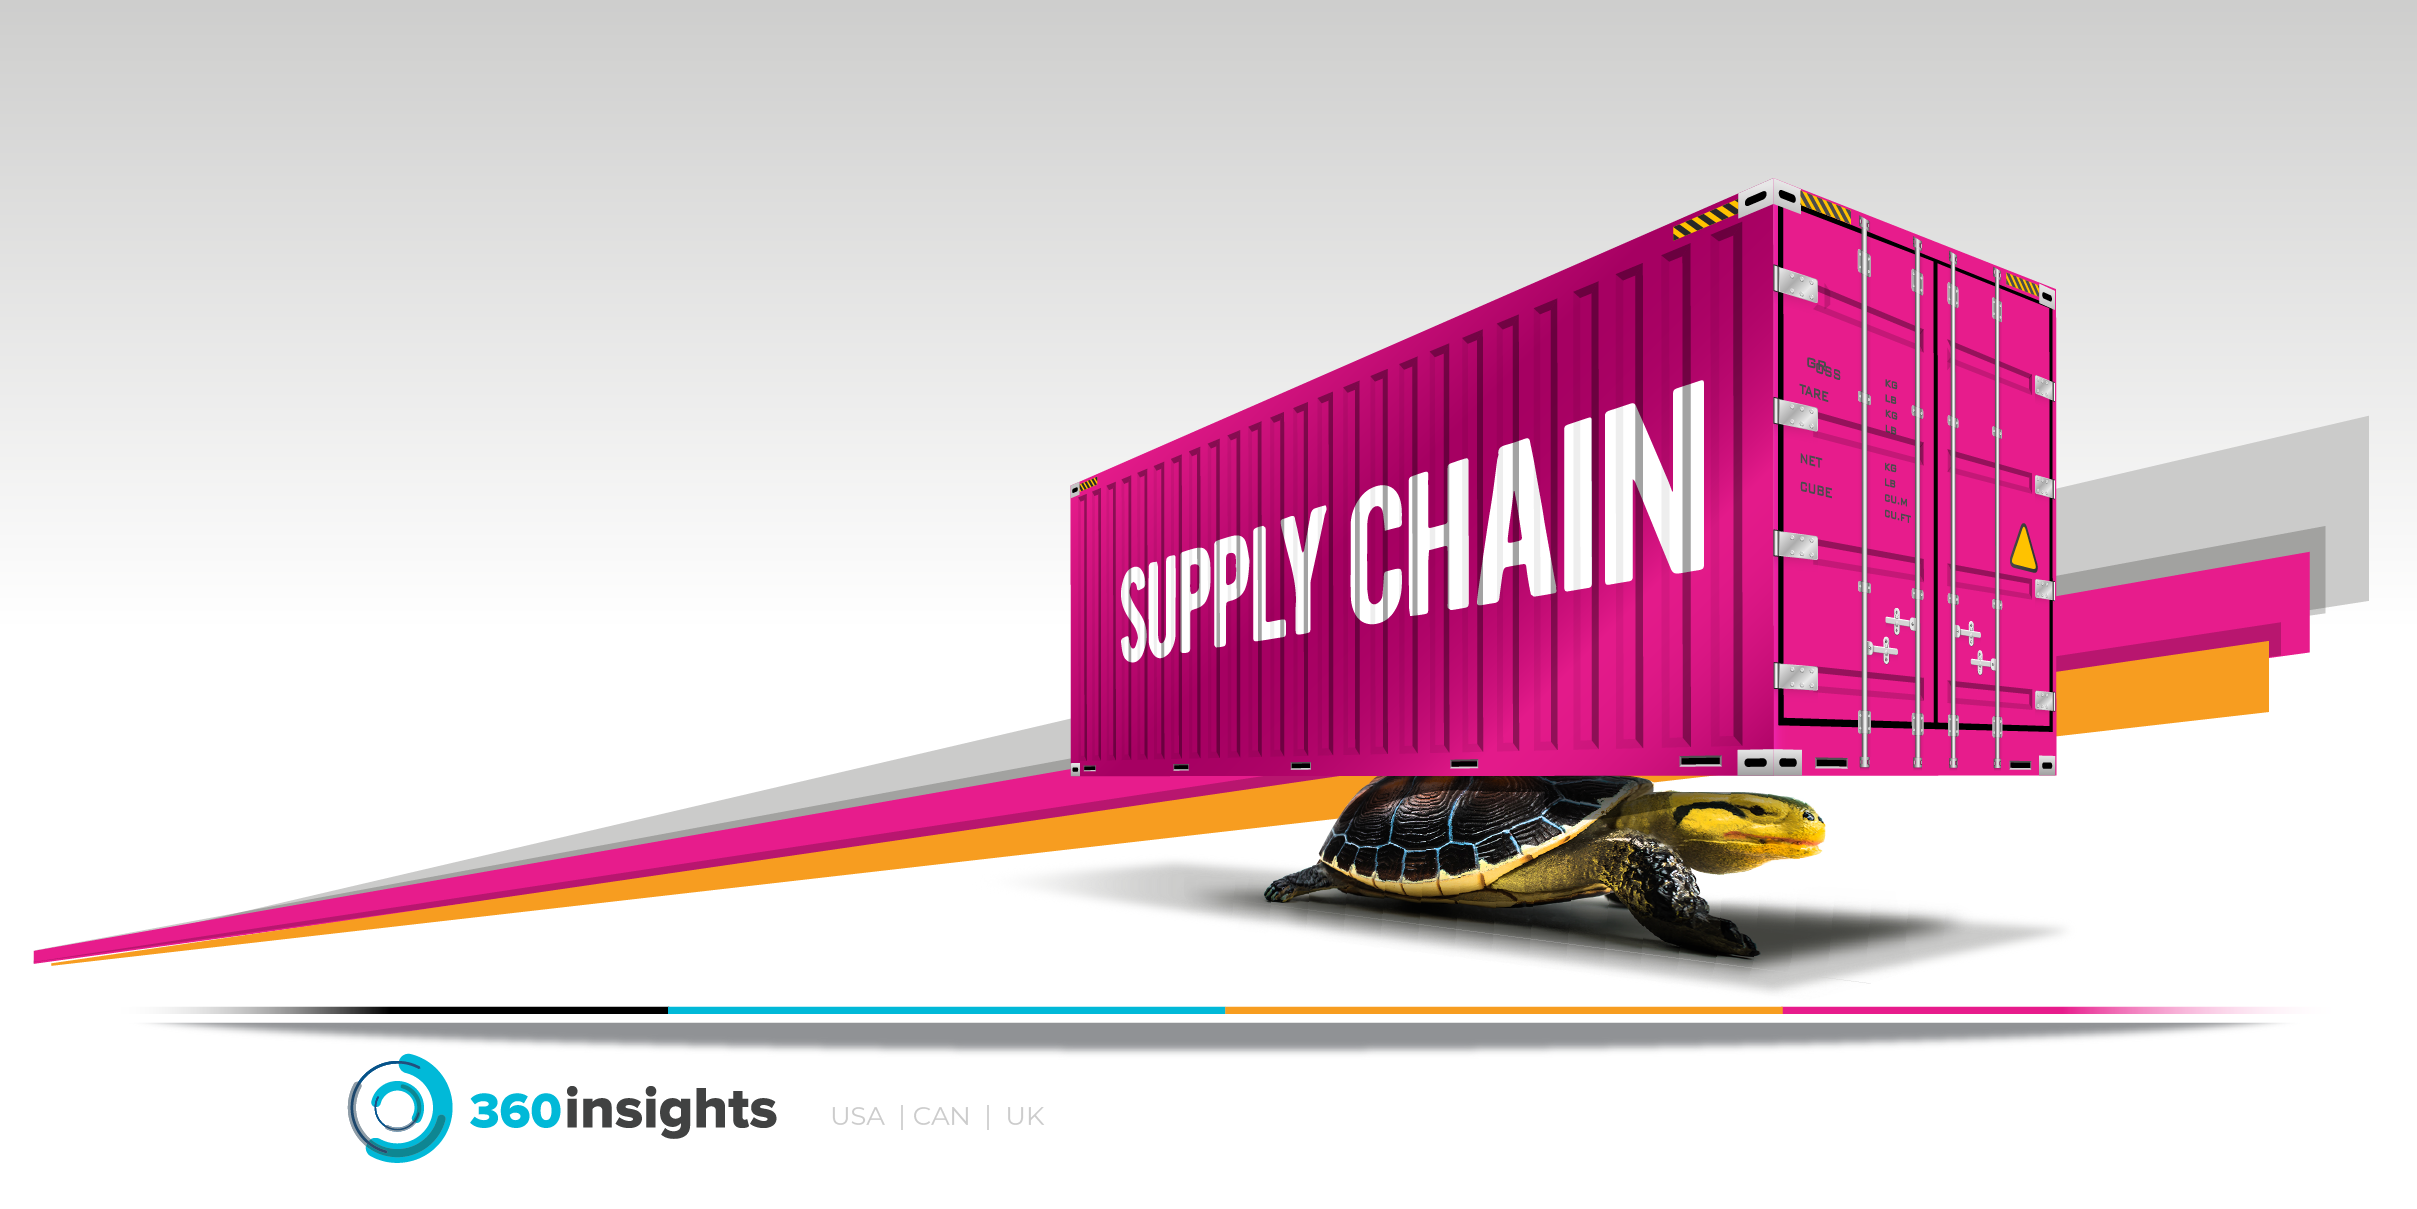 Blog about using supply chain slow downs to boost market share and loyalty